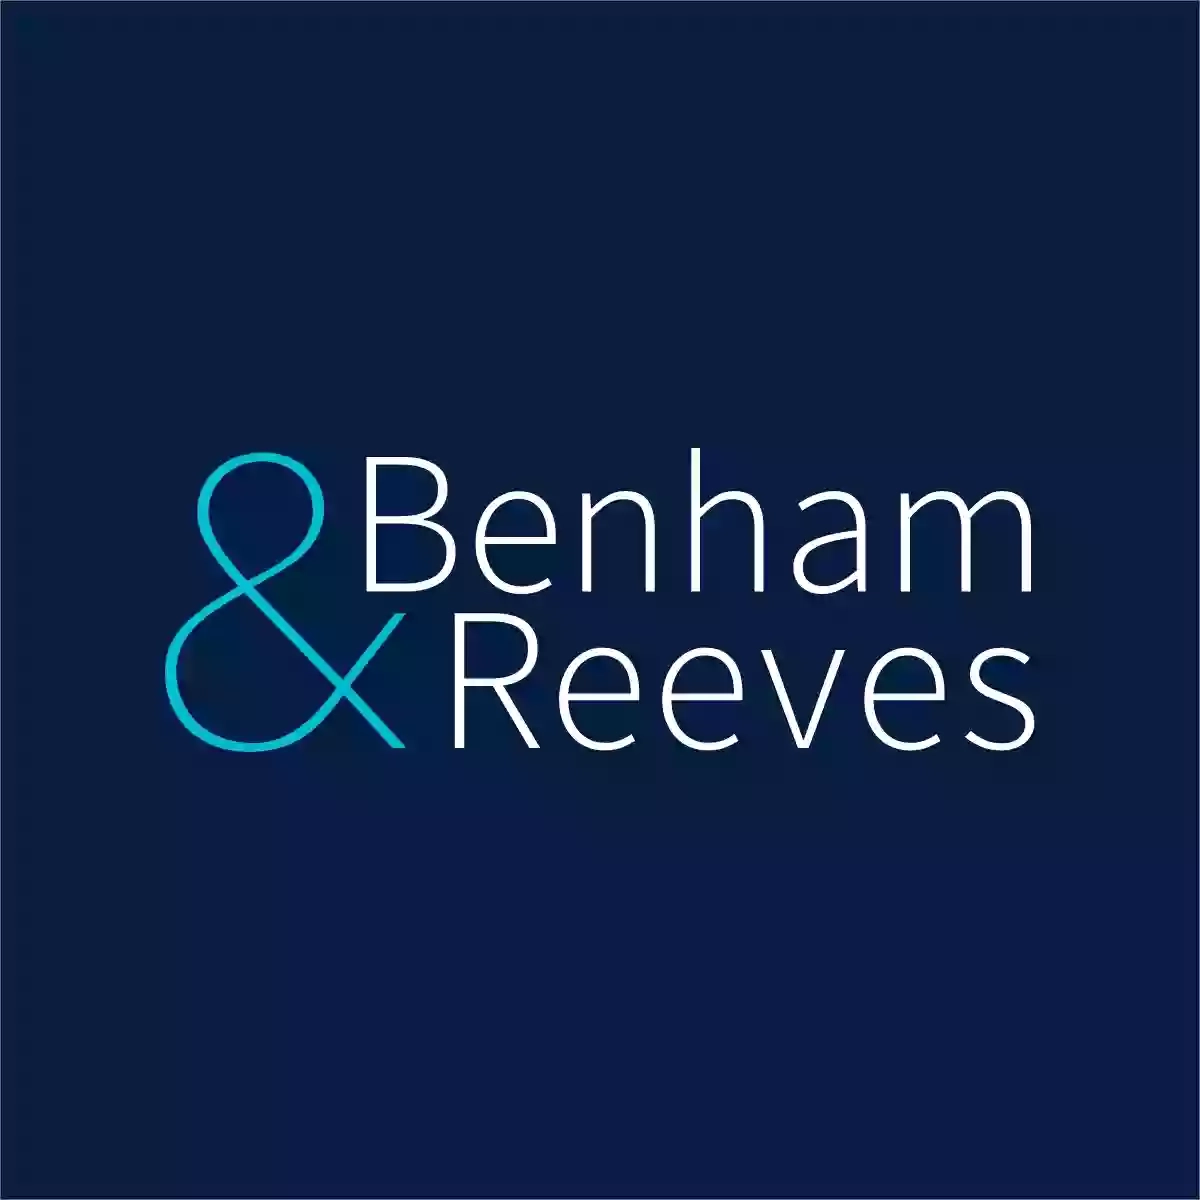 Benham & Reeves - Wapping Estate Agents